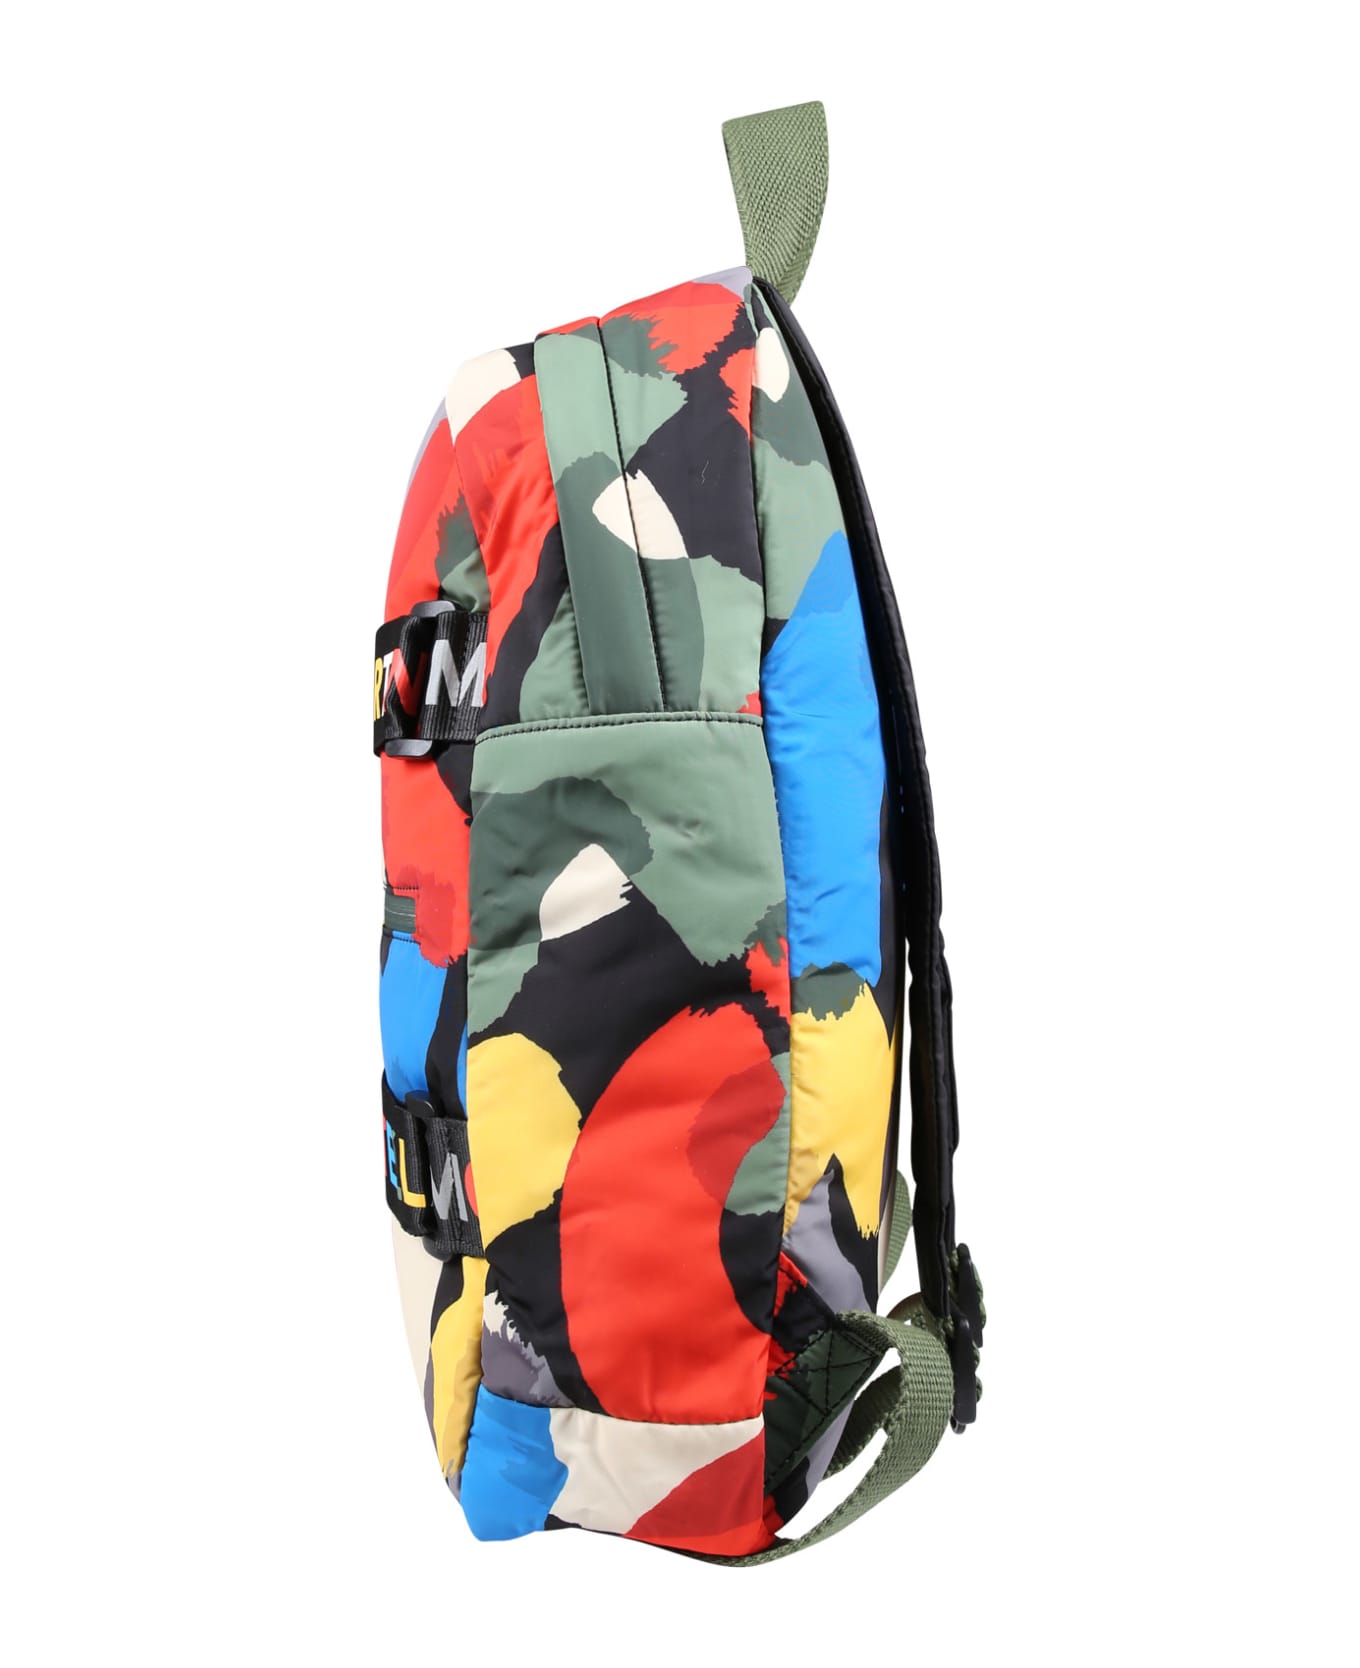 Stella McCartney Kids Multicolor Backpack For Boy With Graphics Print - Multicolor